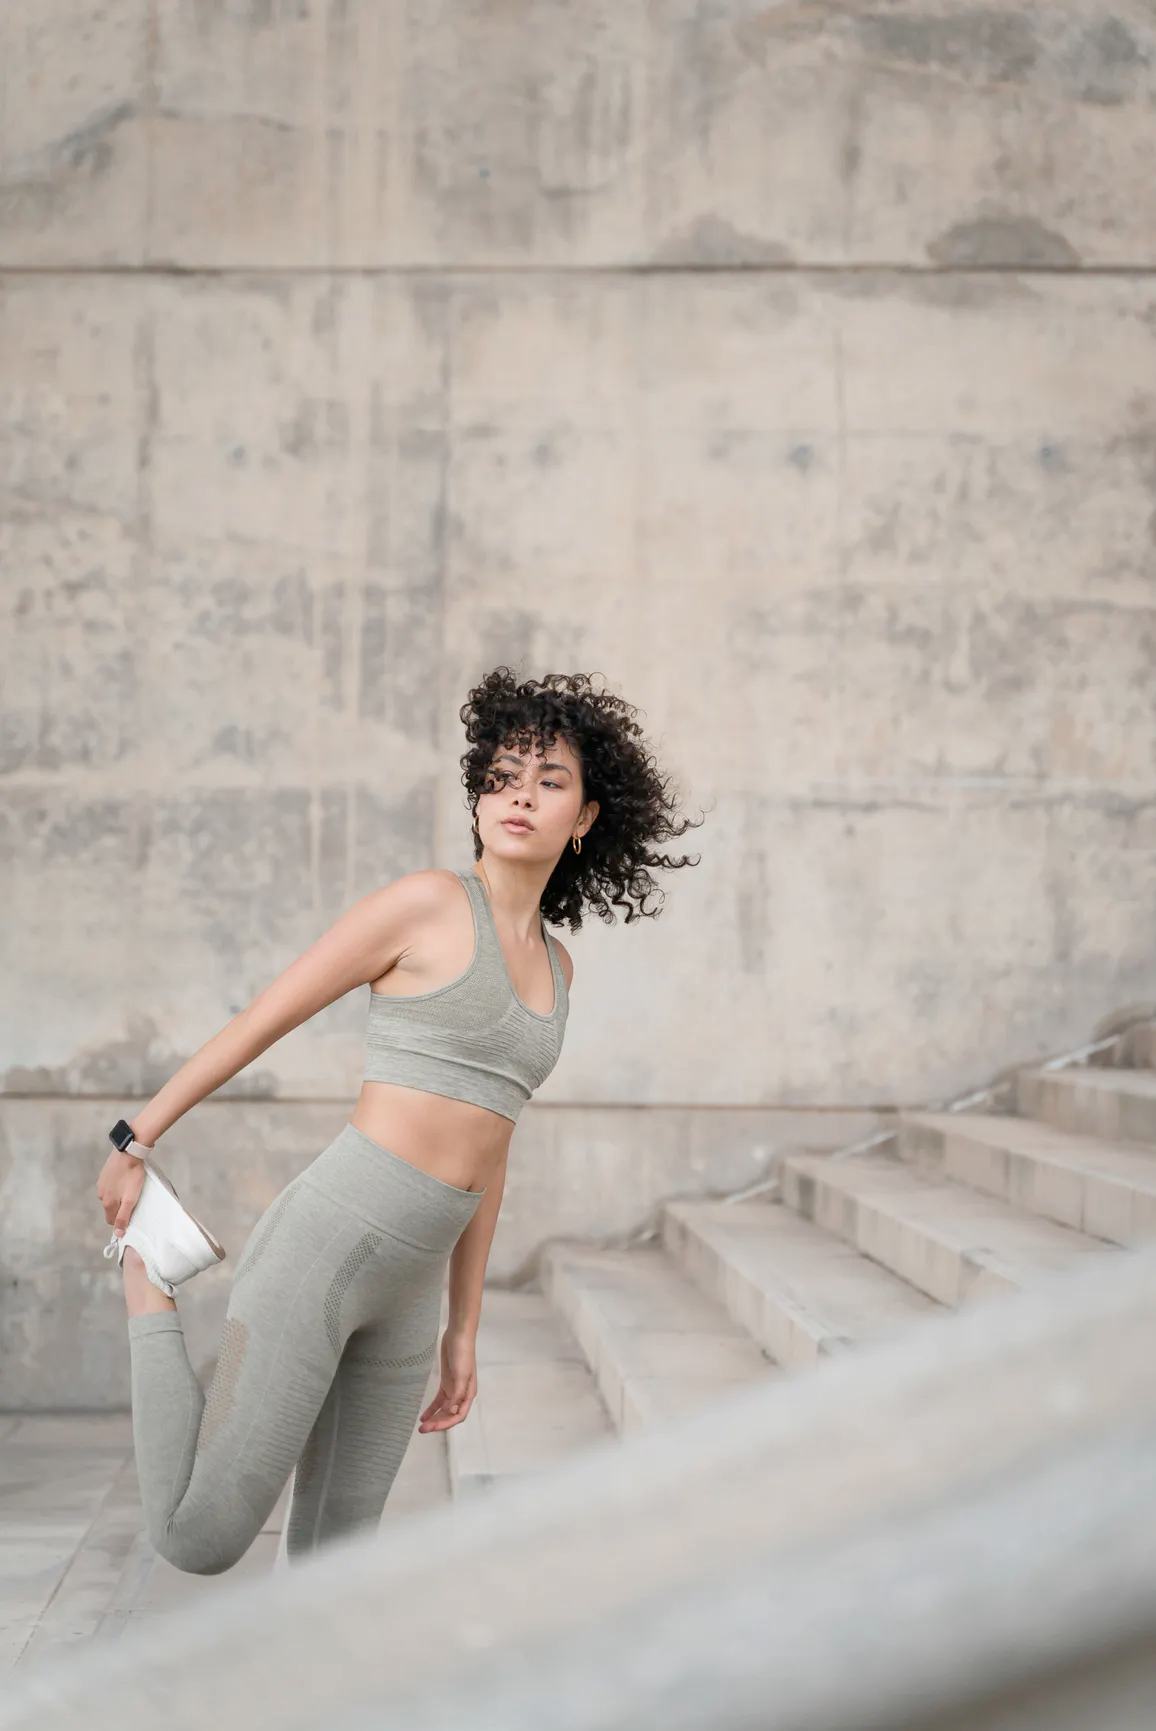 Woman in workout attire stretching her leg outside on a staircase.